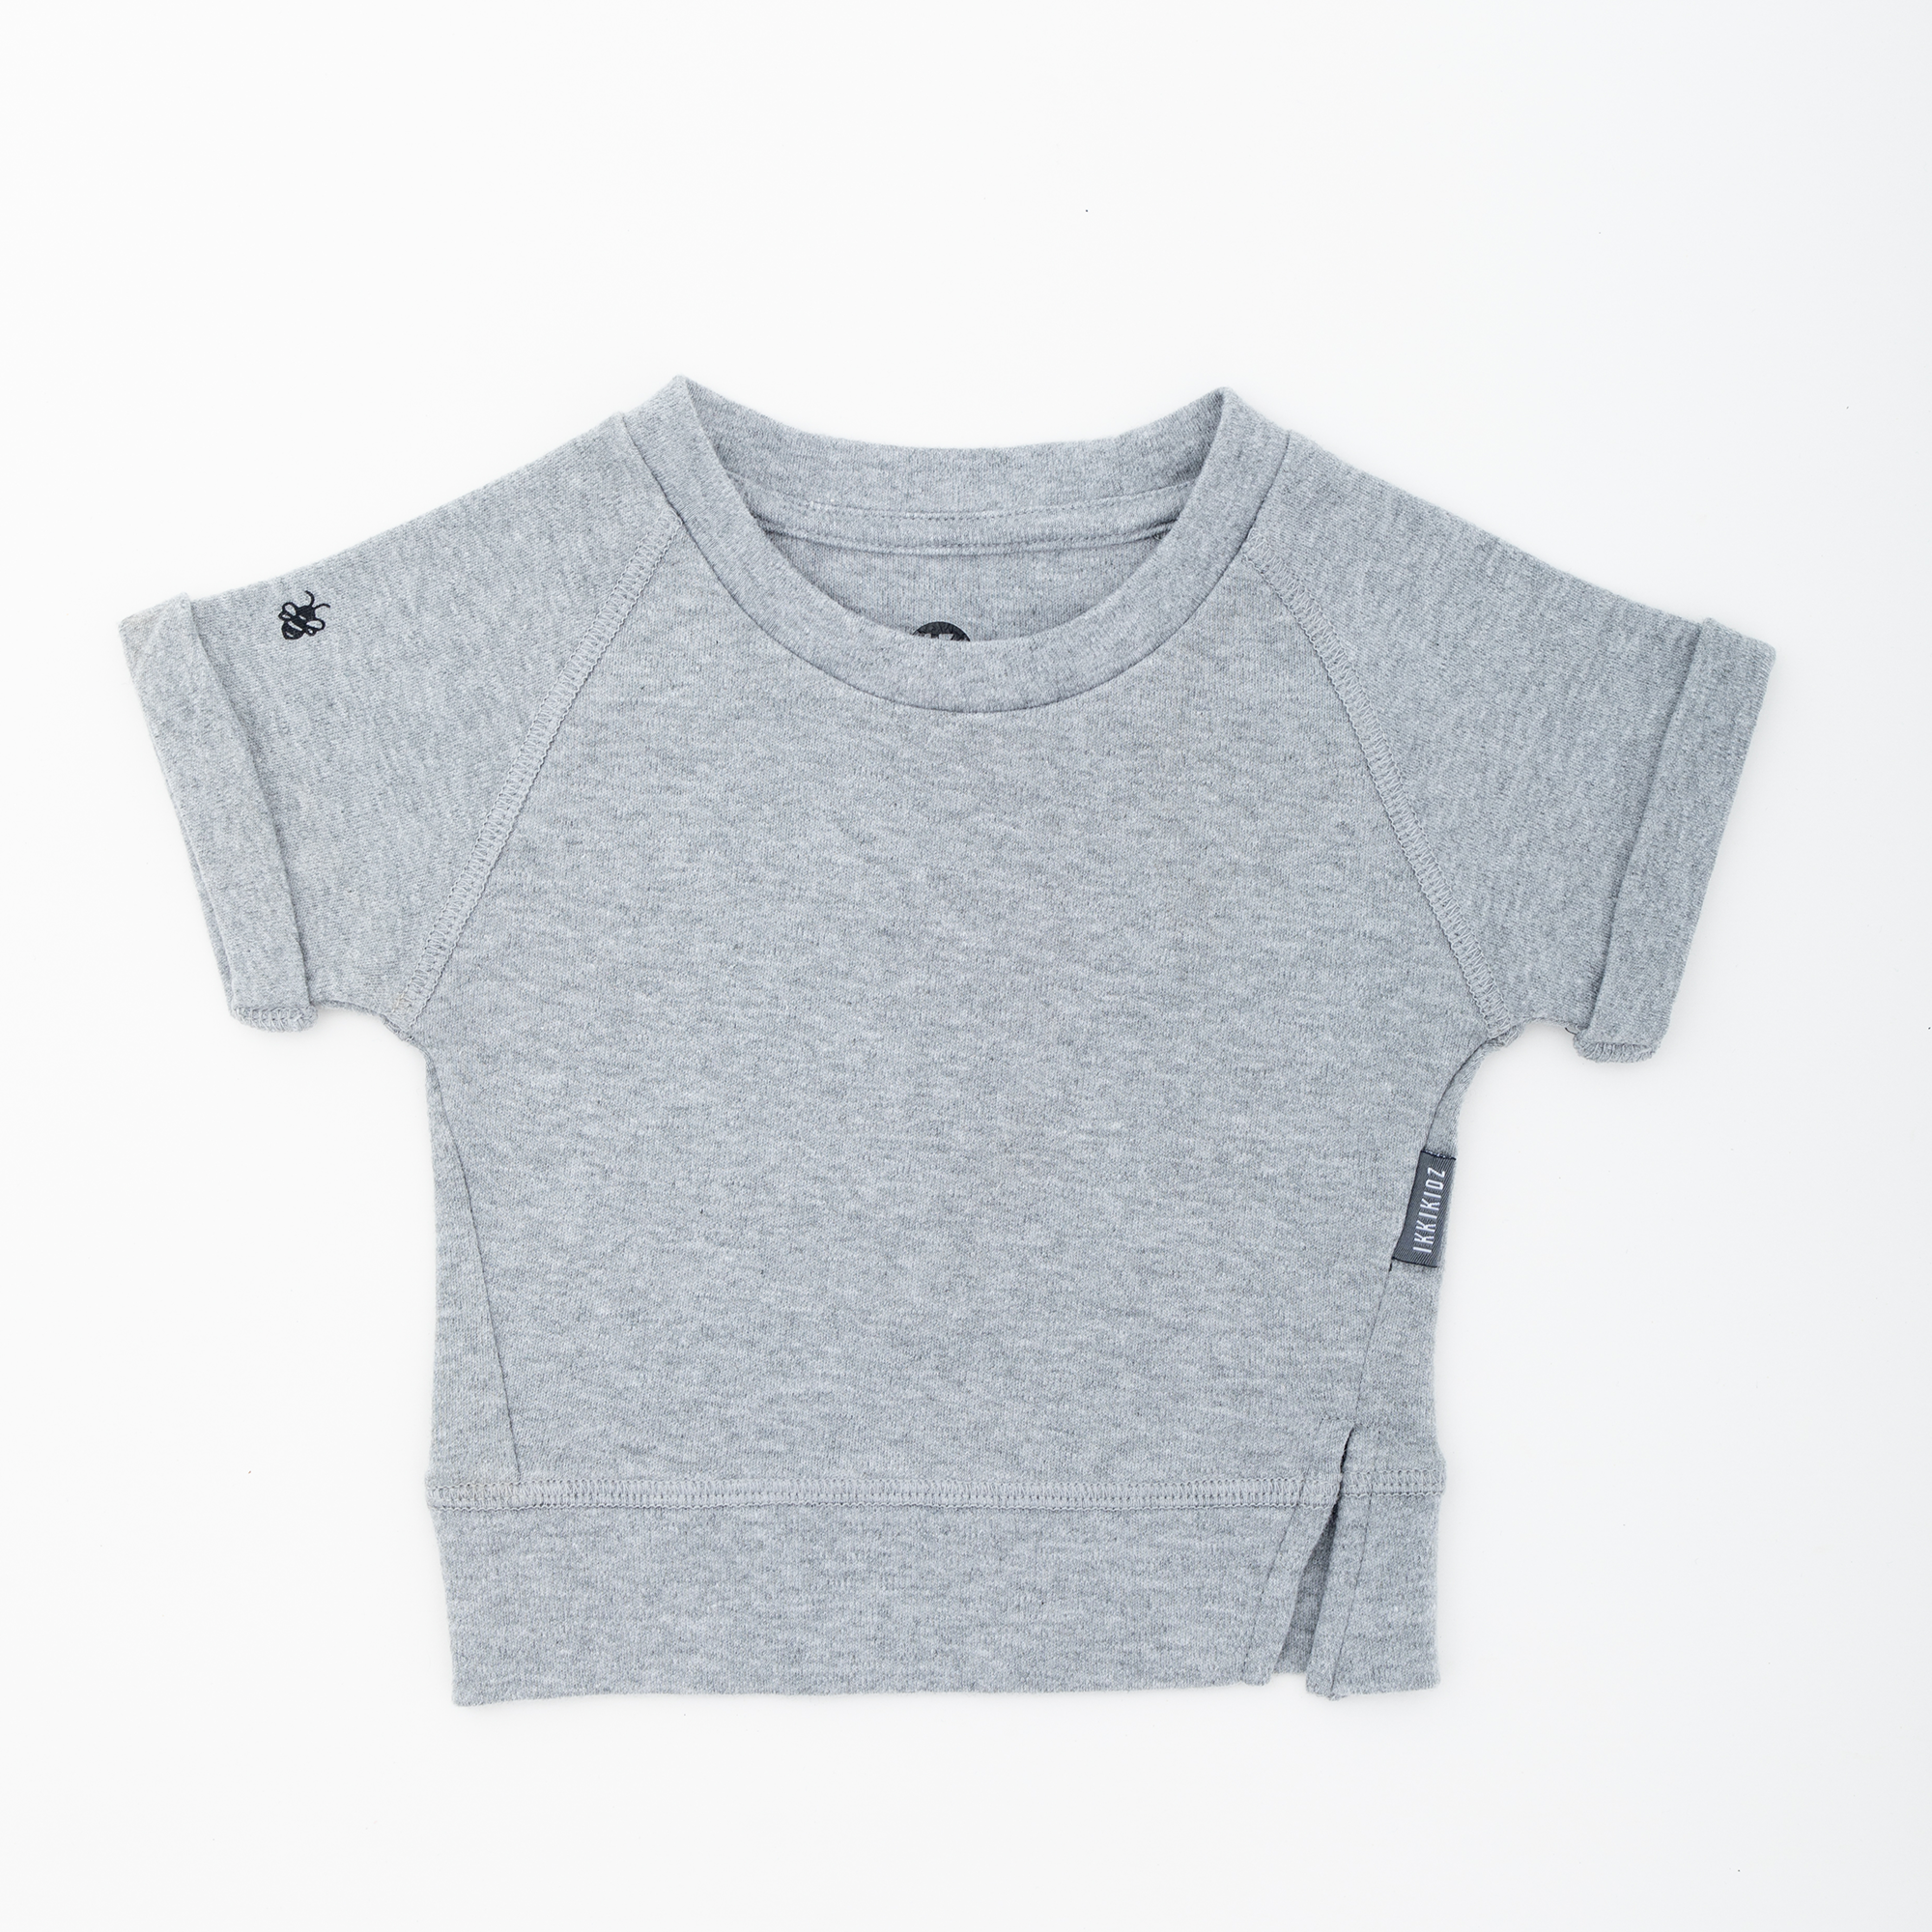 Ikkikidz Bee Baby T-shirt | Buy at The Green Collective